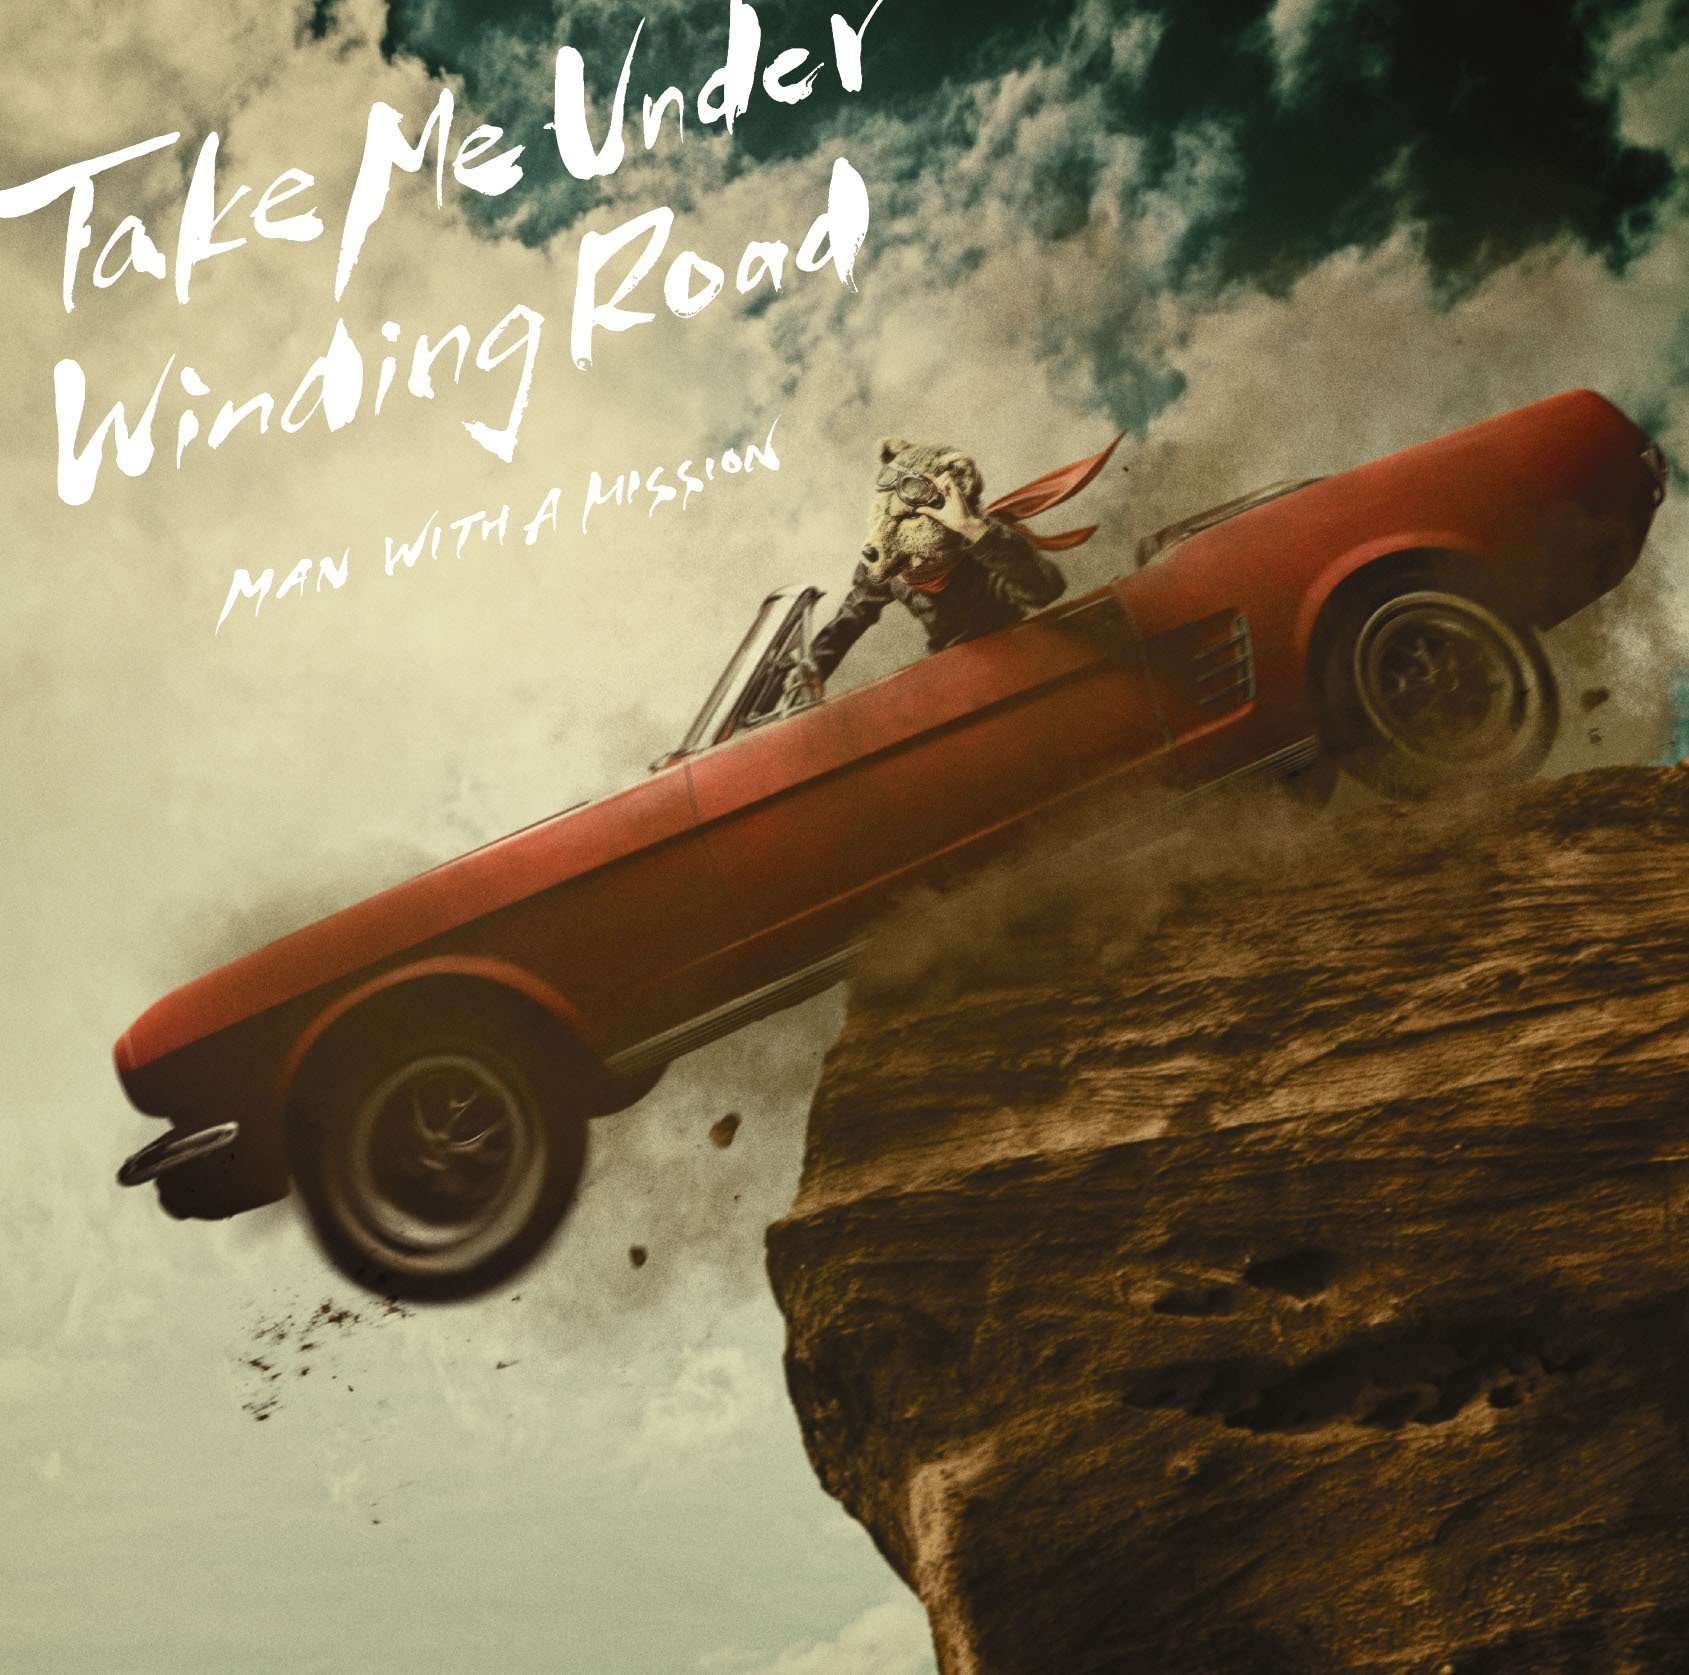 MAN WITH A MISSION – Take Me Under / Winding Road [Mora FLAC 24bit/48kHz]